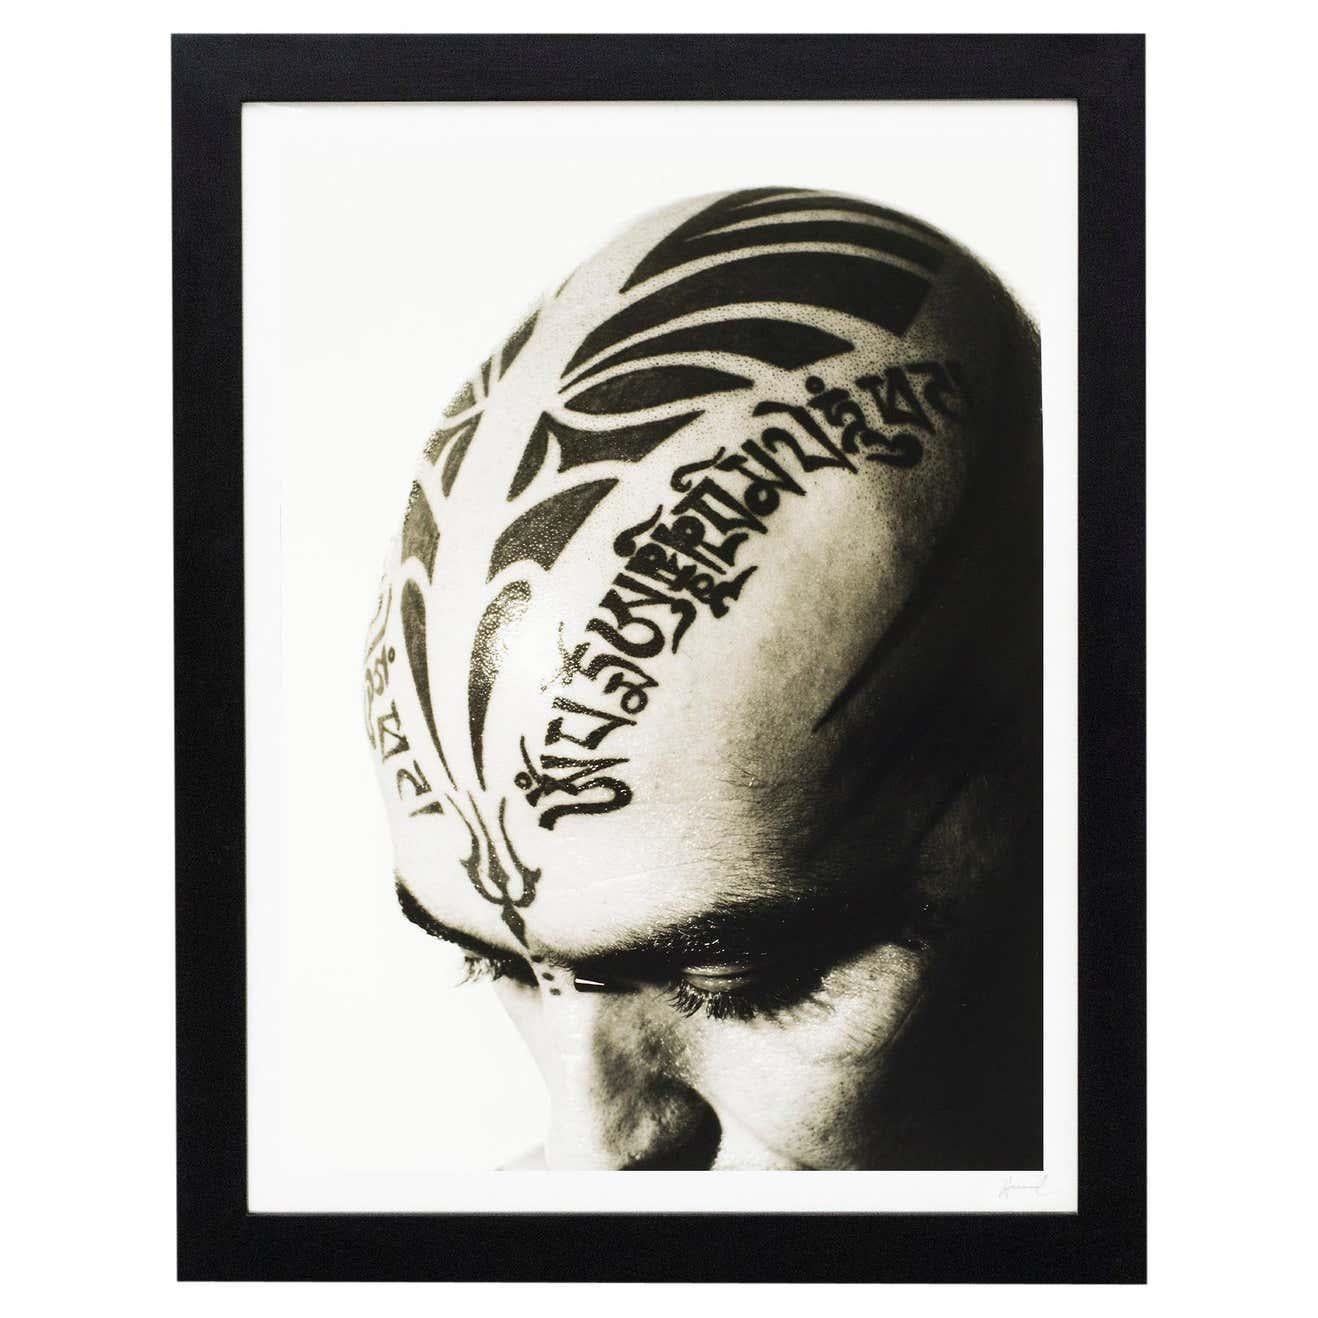 Miquel Arnal Artistic Photograph of a Tattooed Man, circa 1990 For Sale 1